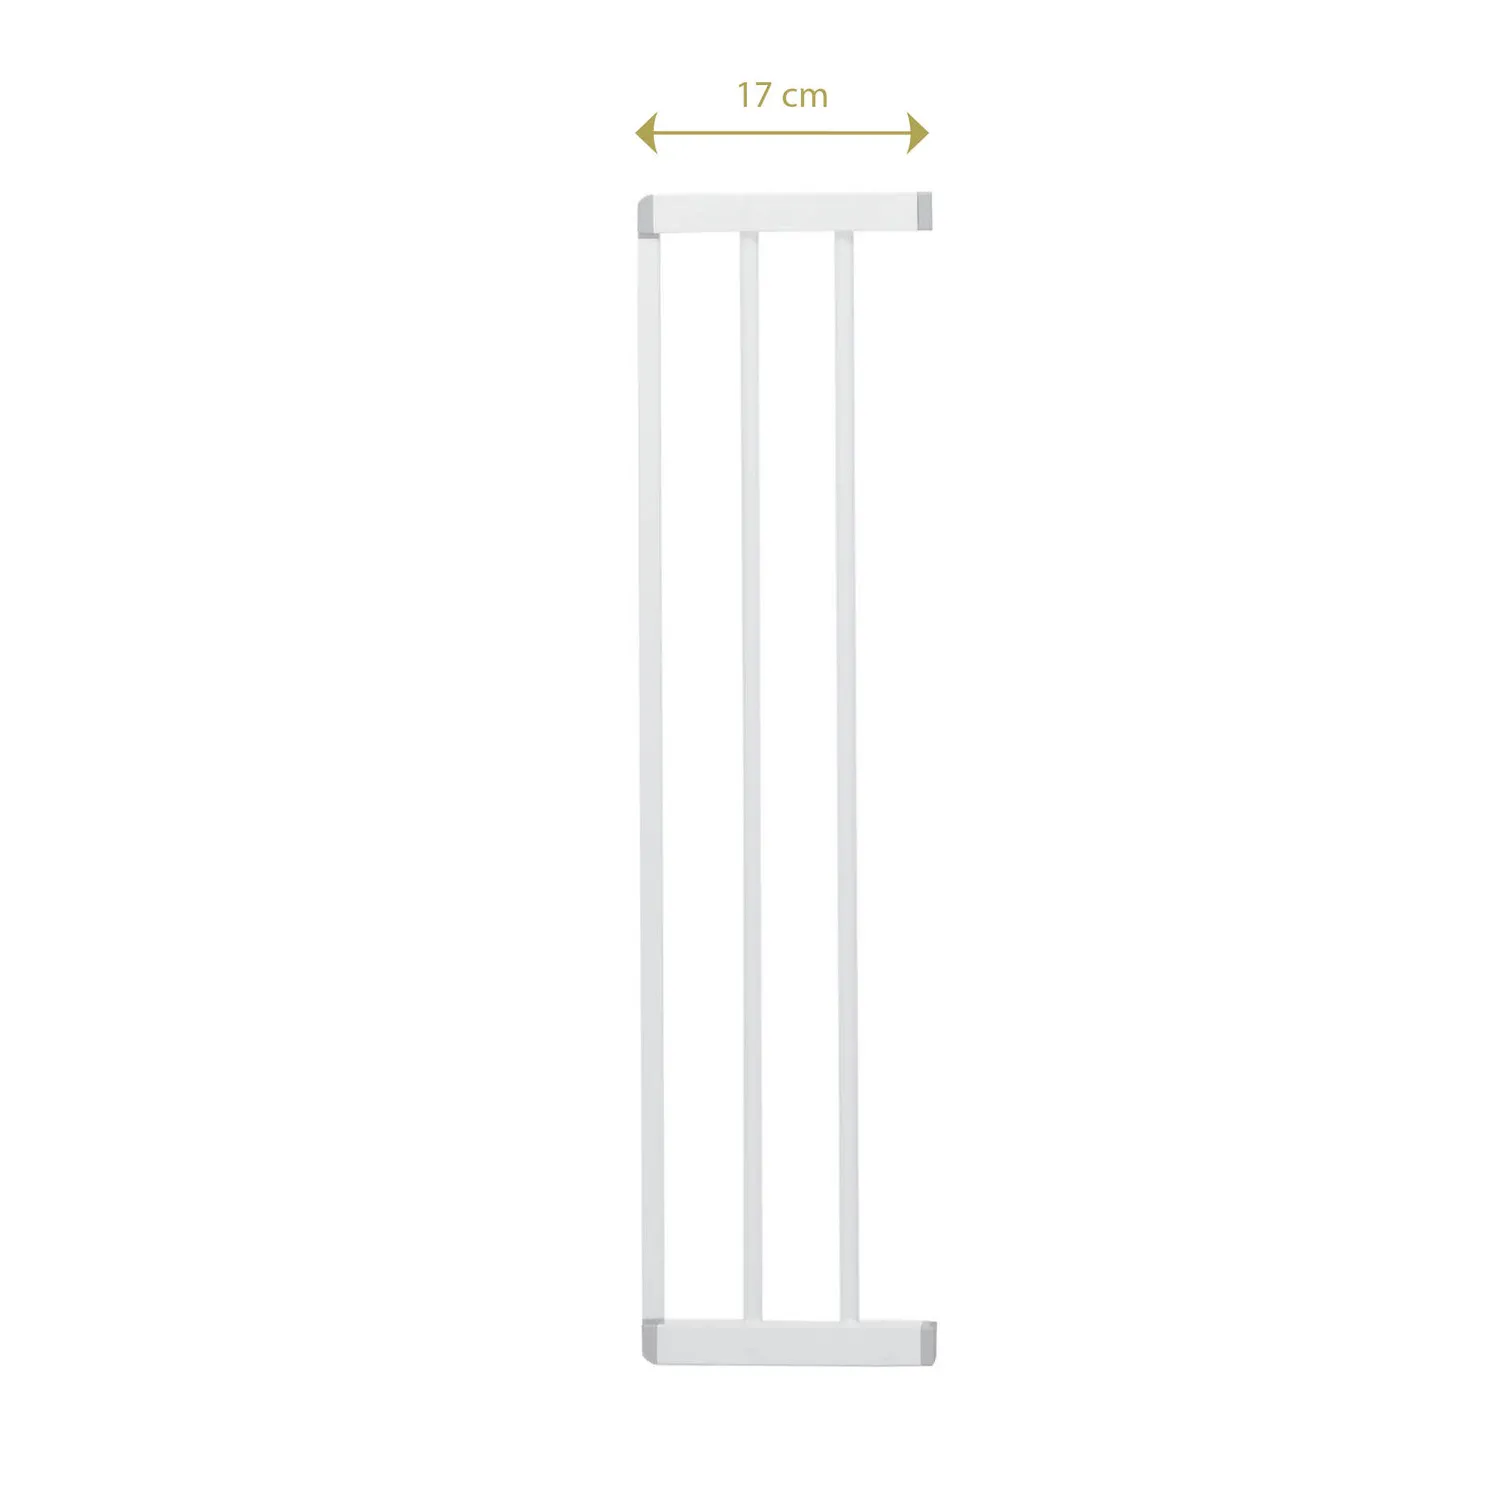 Extension for 4712/2713, +17 cm